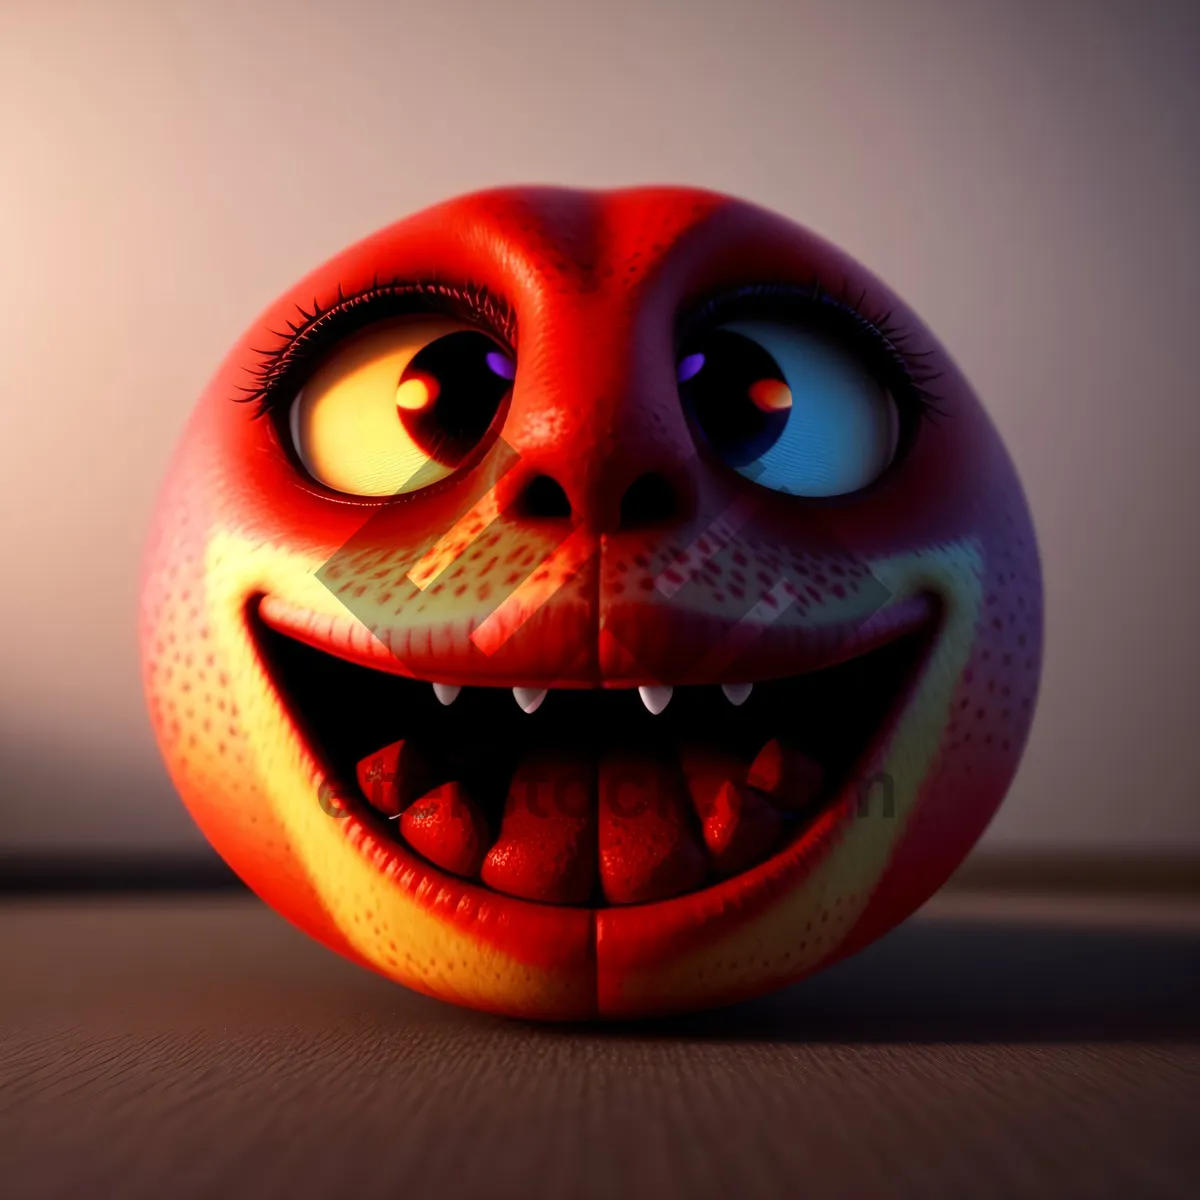 Picture of Spooky Halloween Jack-o'-Lantern Grinning in Darkness